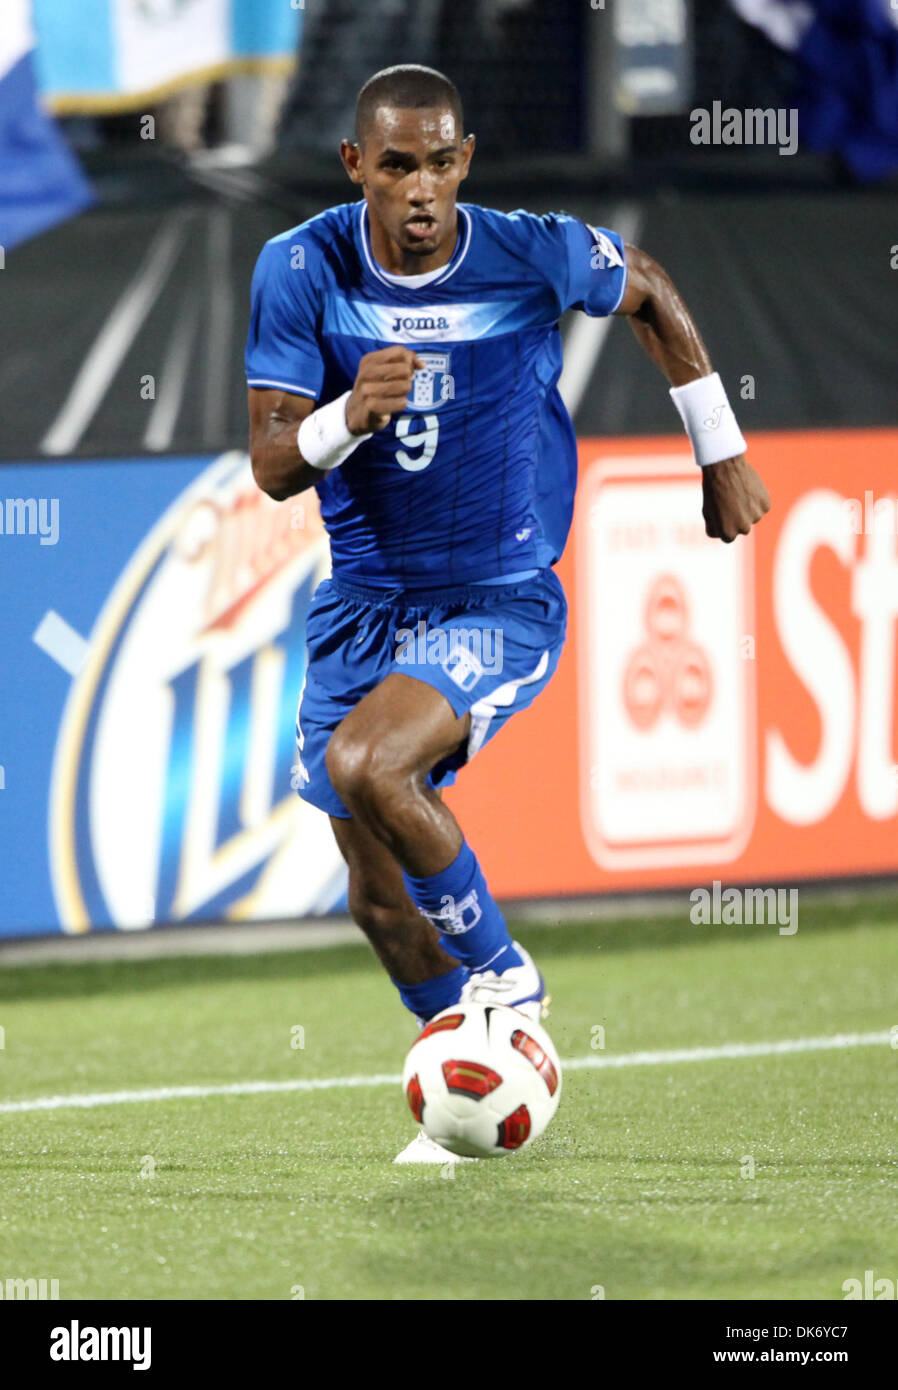 June 10, 2011 - Fort Lauderdale, Florida, U.S - Honduras forward Jerry Bengtson #9 in action during the 2011 CONCACAF Gold Cup game  at FIU Stadium in Miami, Florida.Honduras defeated Grenada with score of 7-1. (Credit Image: © Luis Blanco/Southcreek Global/ZUMApress.com) Stock Photo